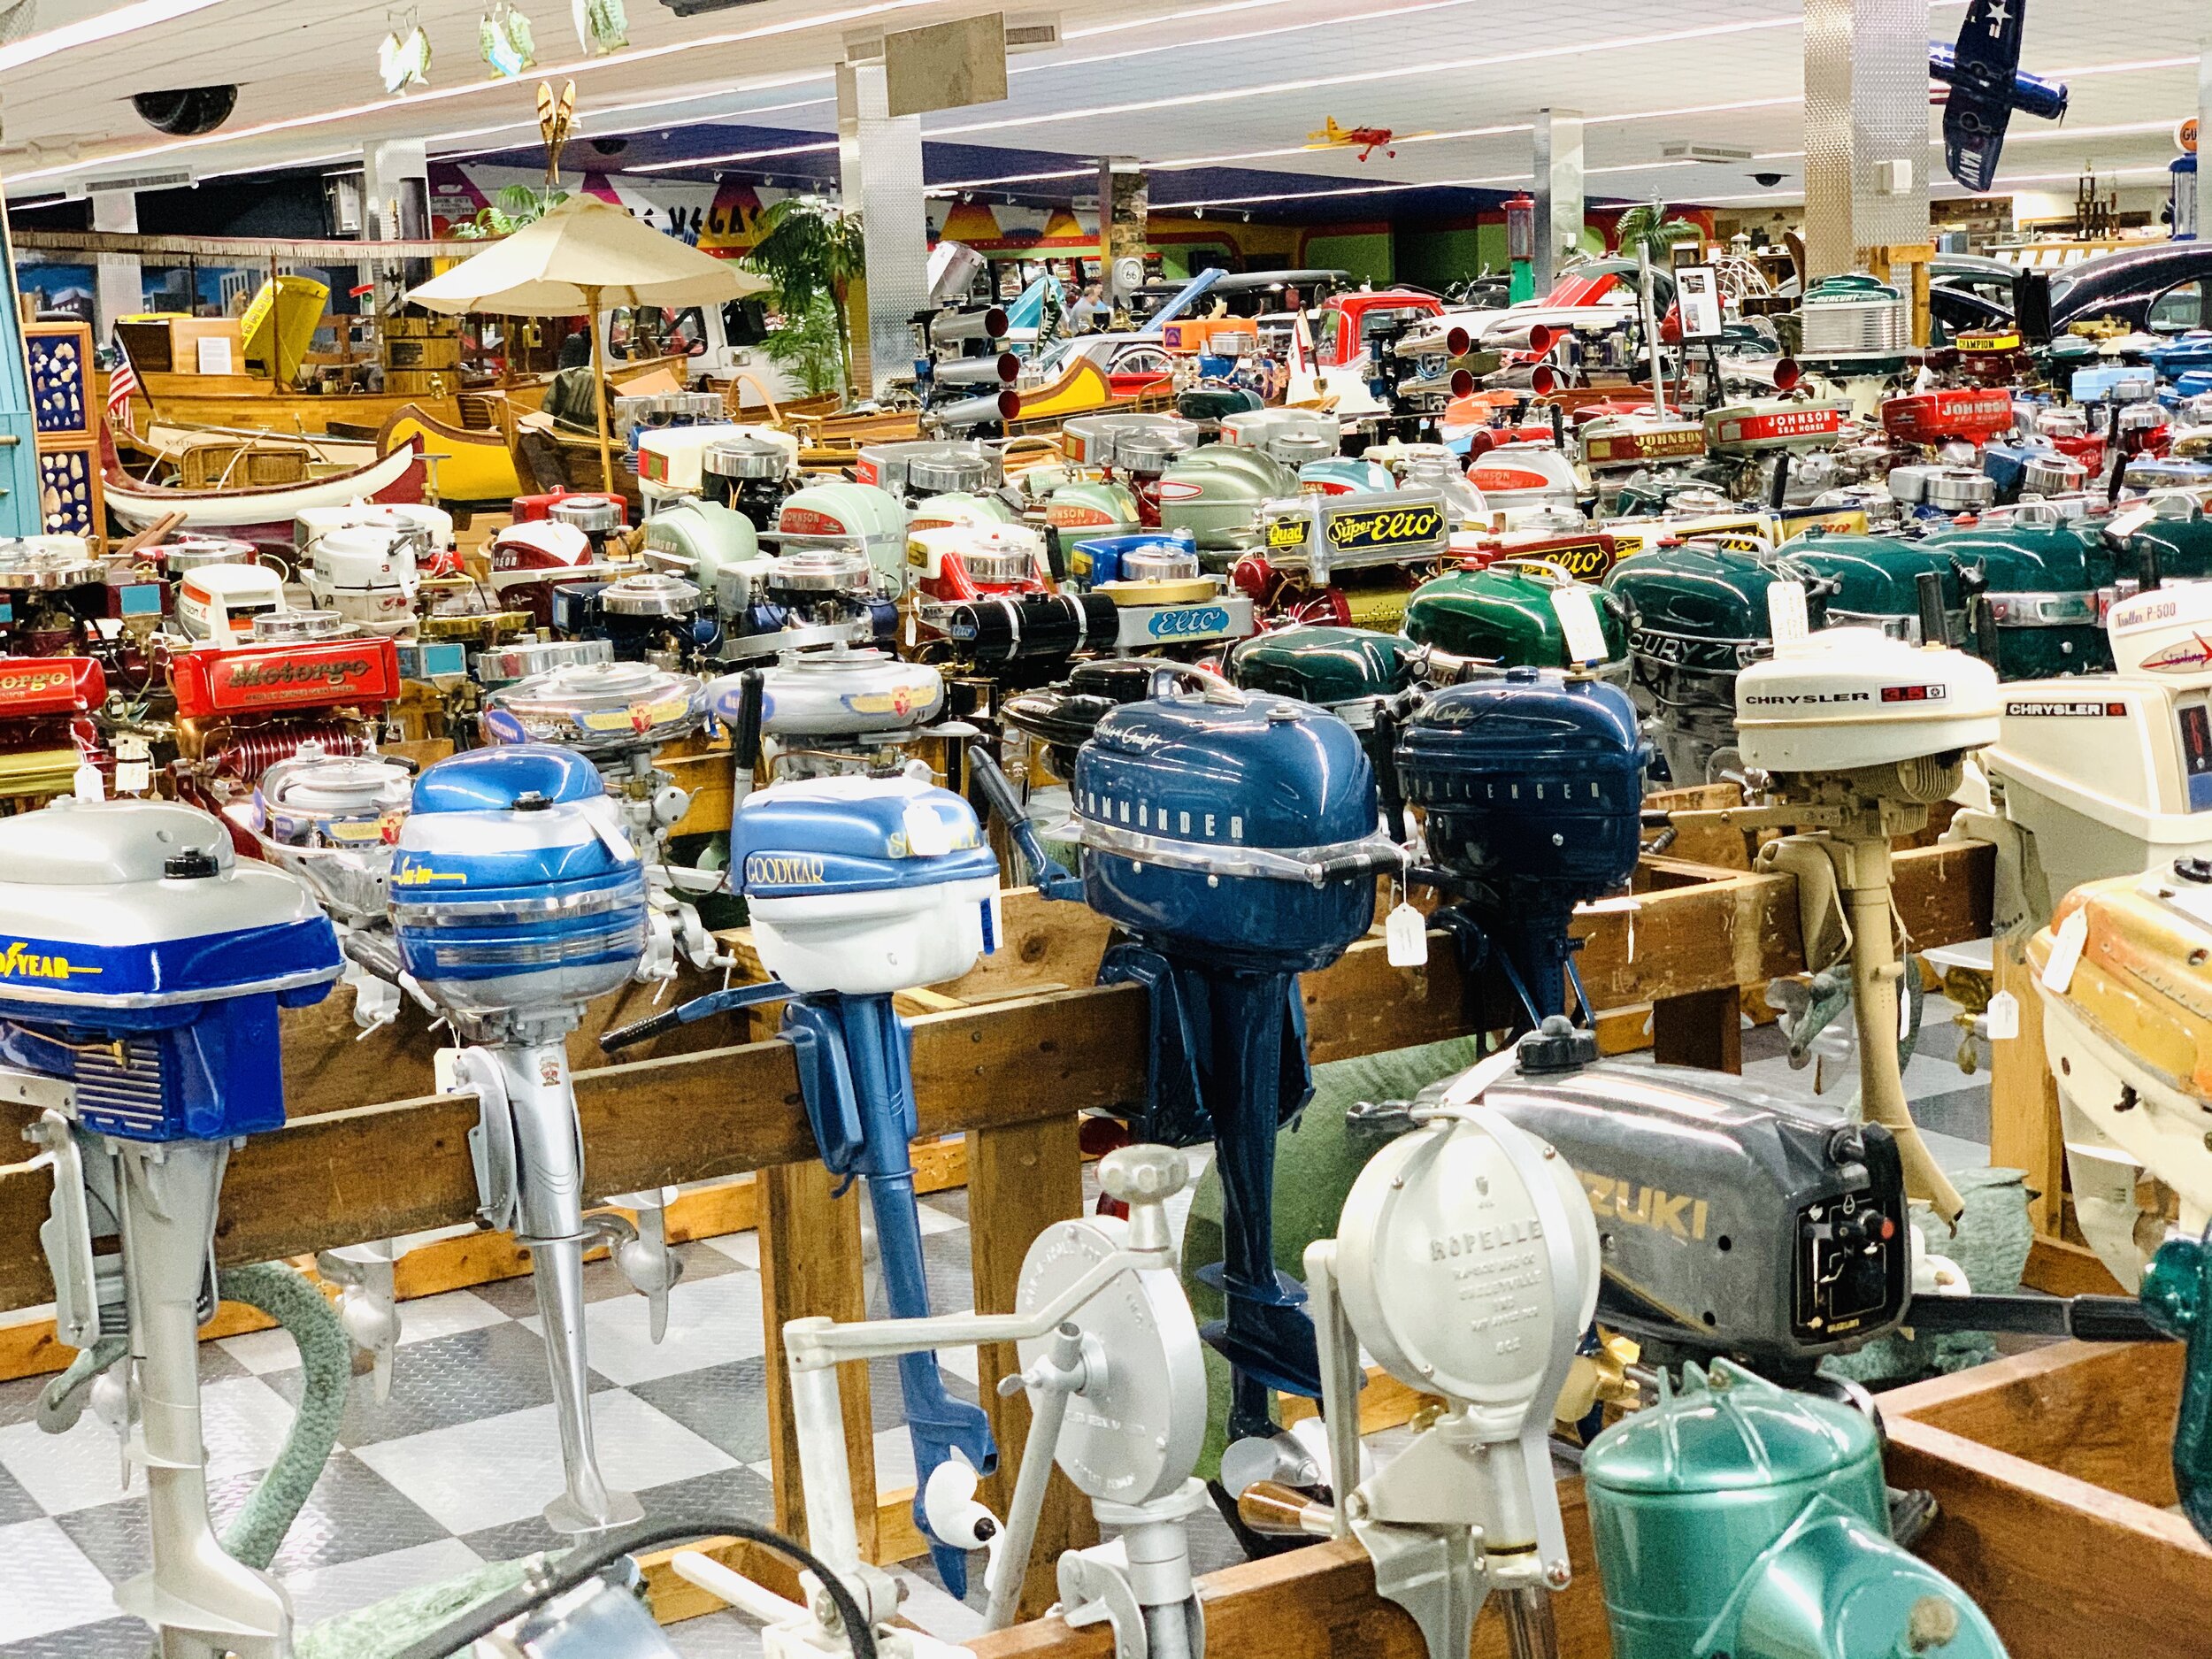  As you might imagine, this is the largest boat motor collection in the world. 😲 